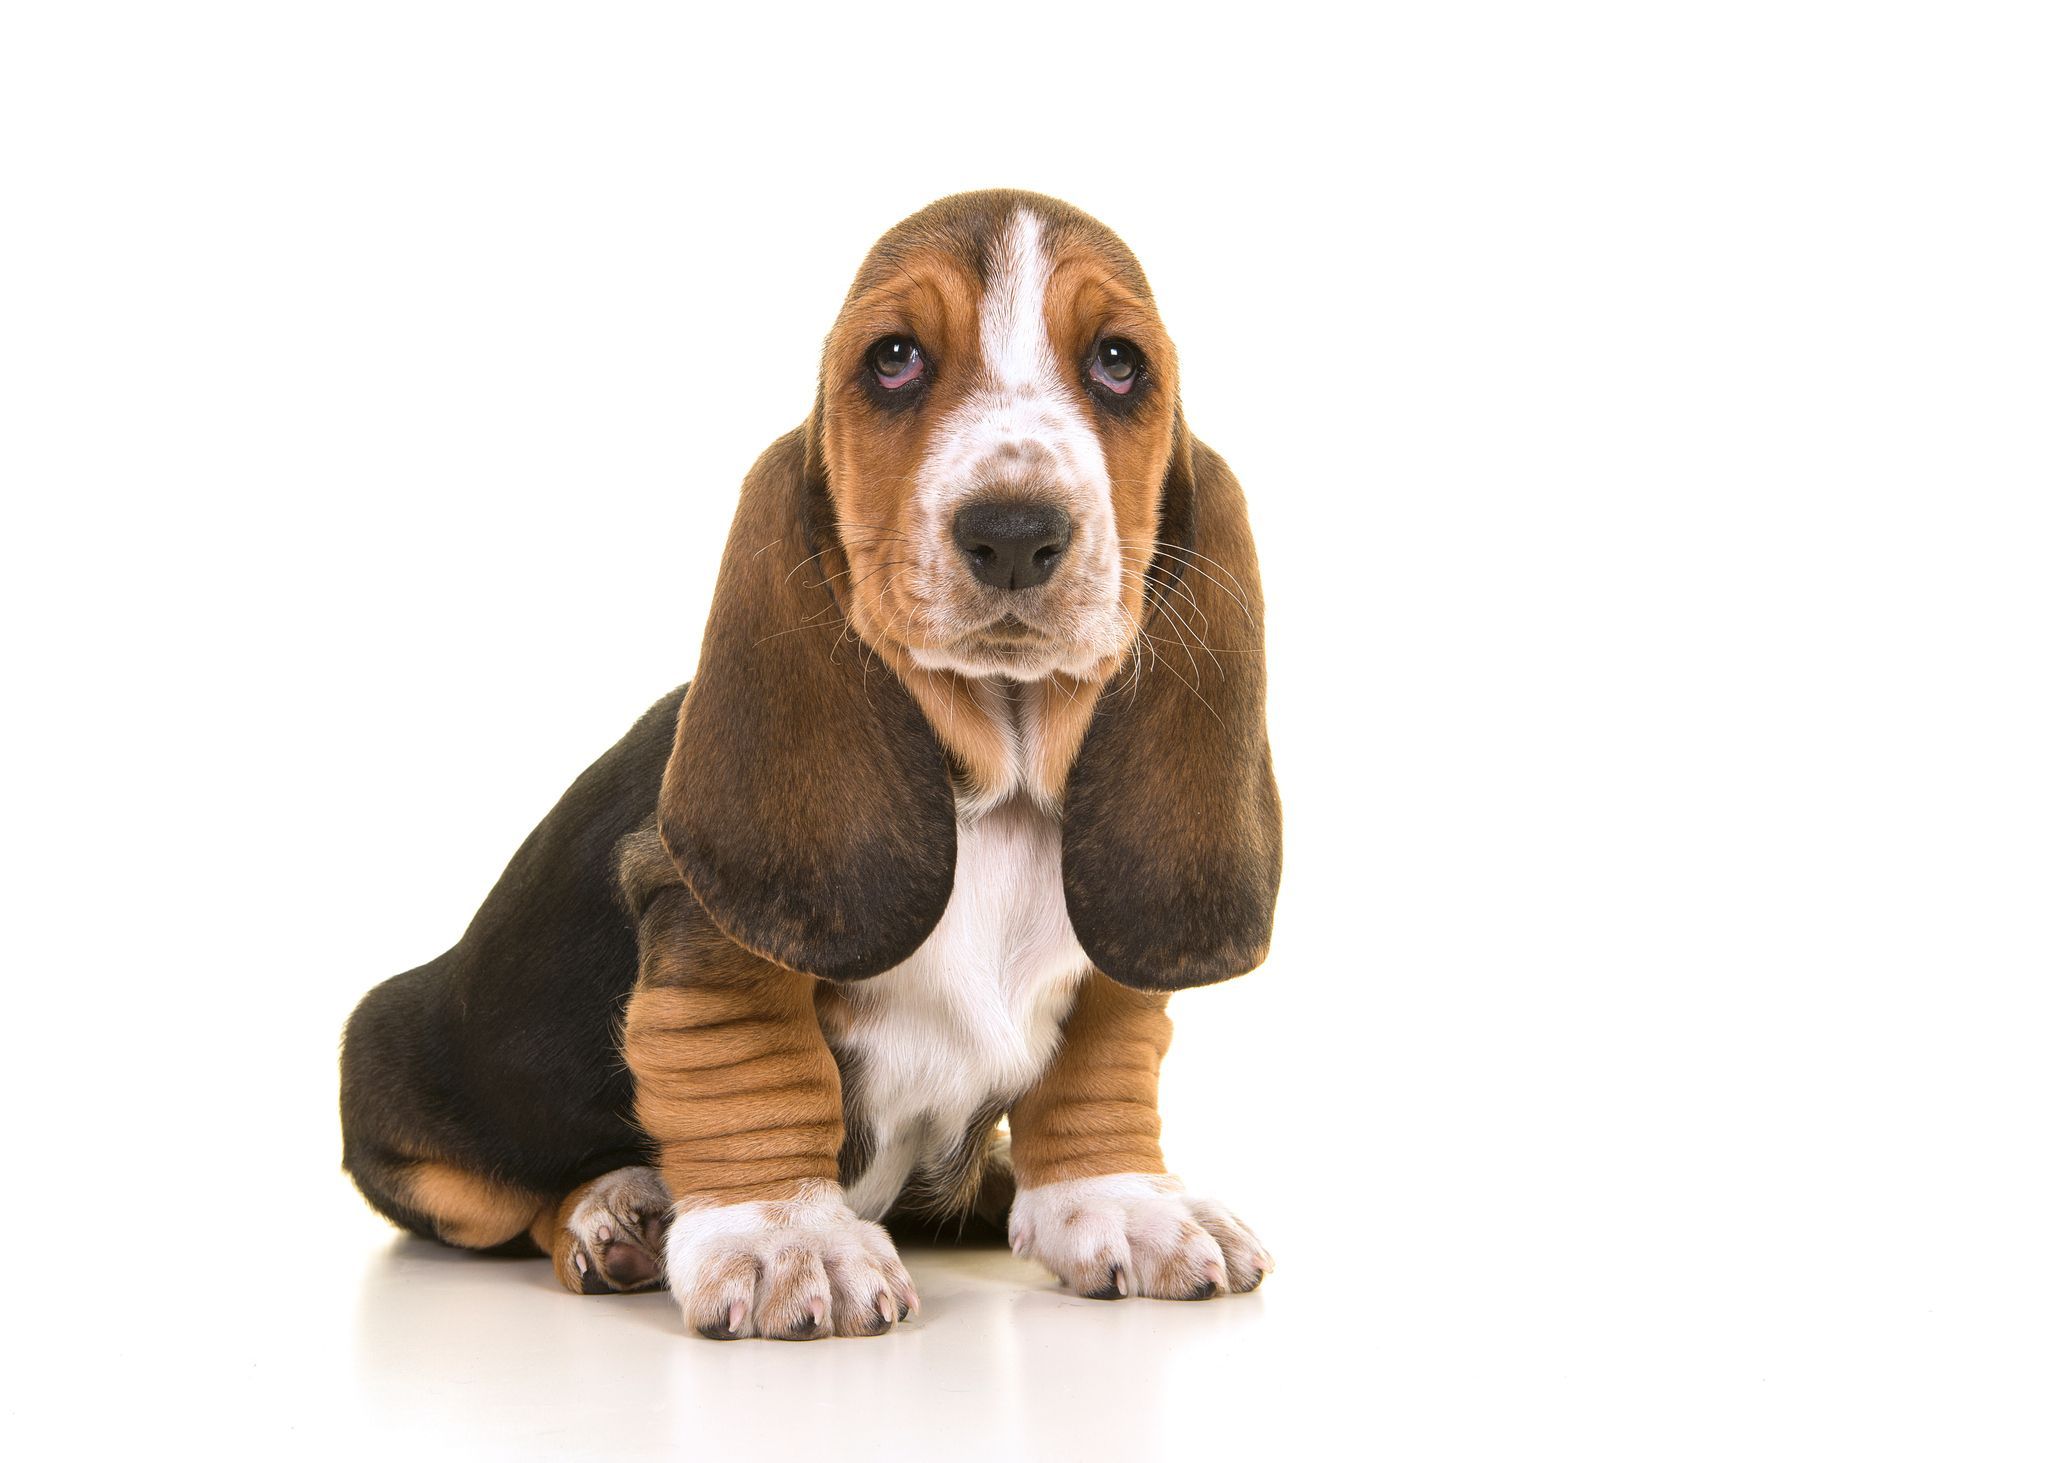 13 Dogs With Big Ears: Basset Hounds 